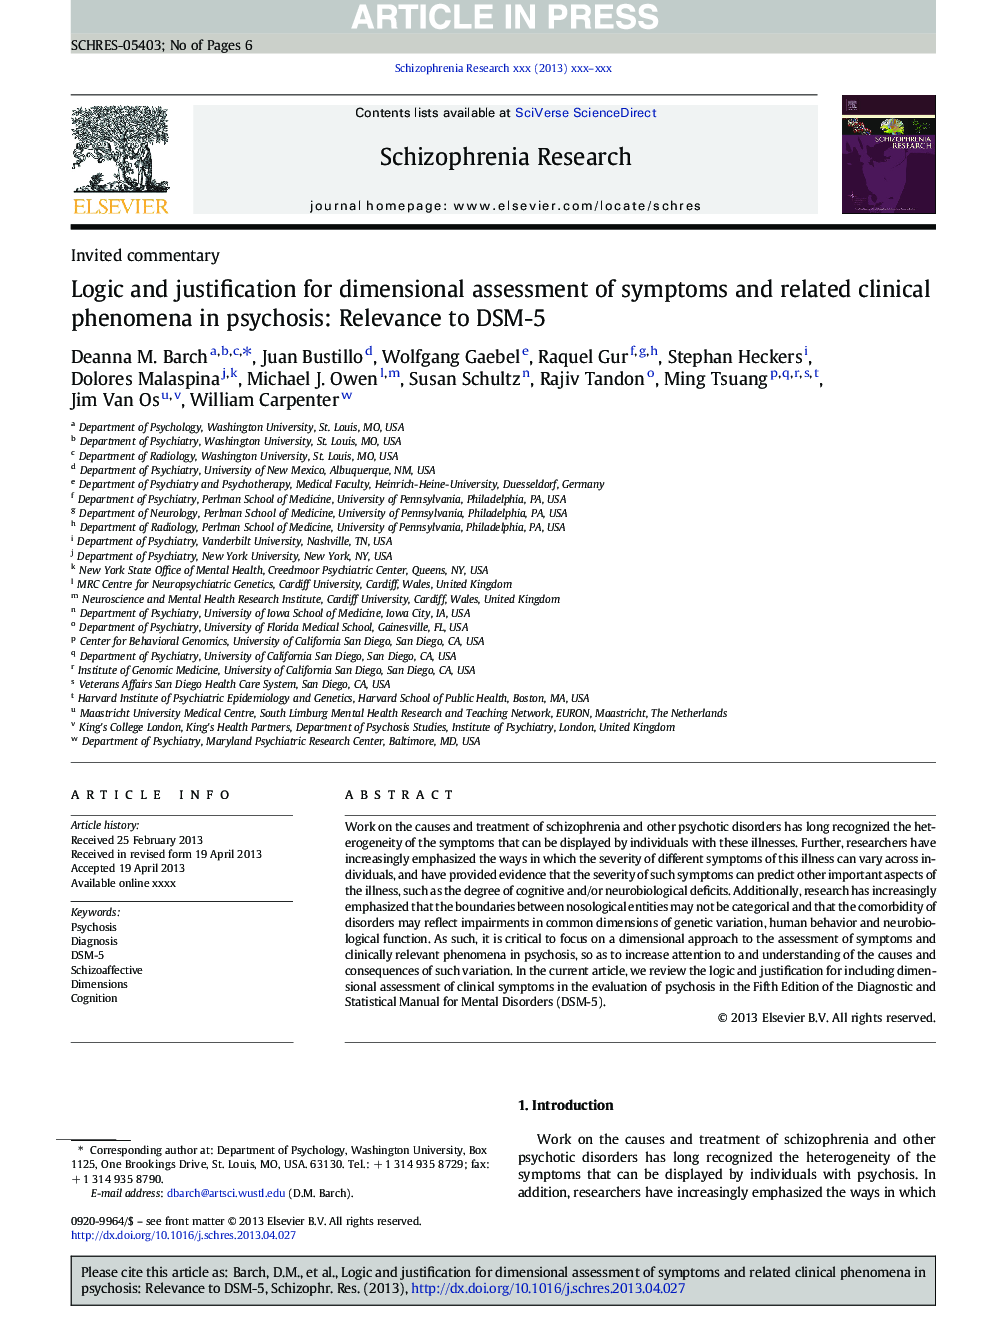 Logic and justification for dimensional assessment of symptoms and related clinical phenomena in psychosis: Relevance to DSM-5